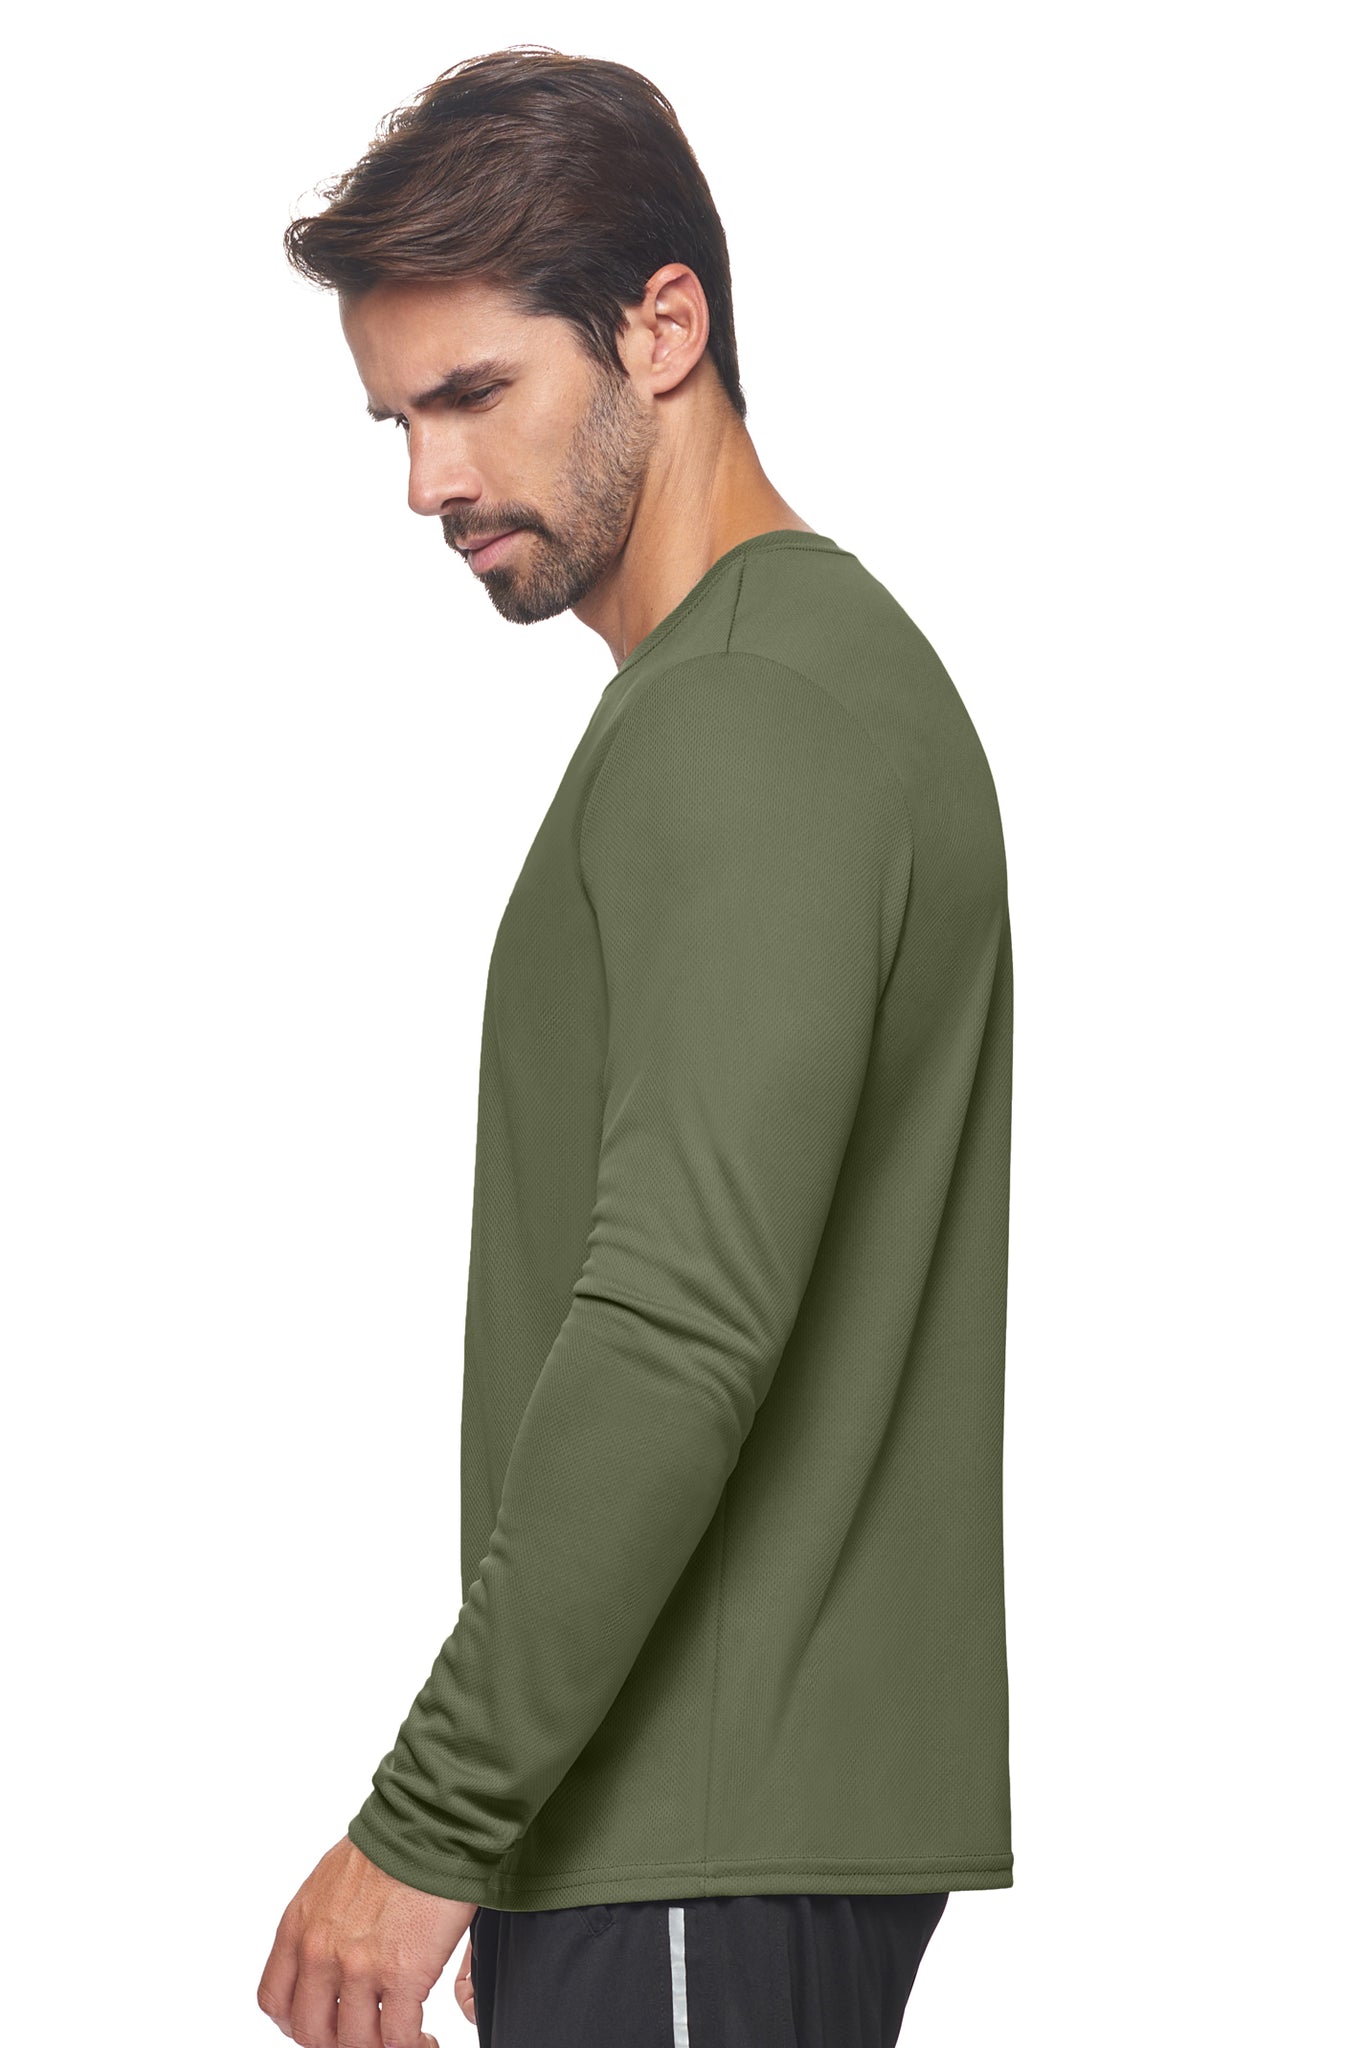 Expert Brand Wholesale Sportswear Activewear Made in USA Oxymesh™ Long Sleeve Tec Tee AJ901D military green 2#military-green